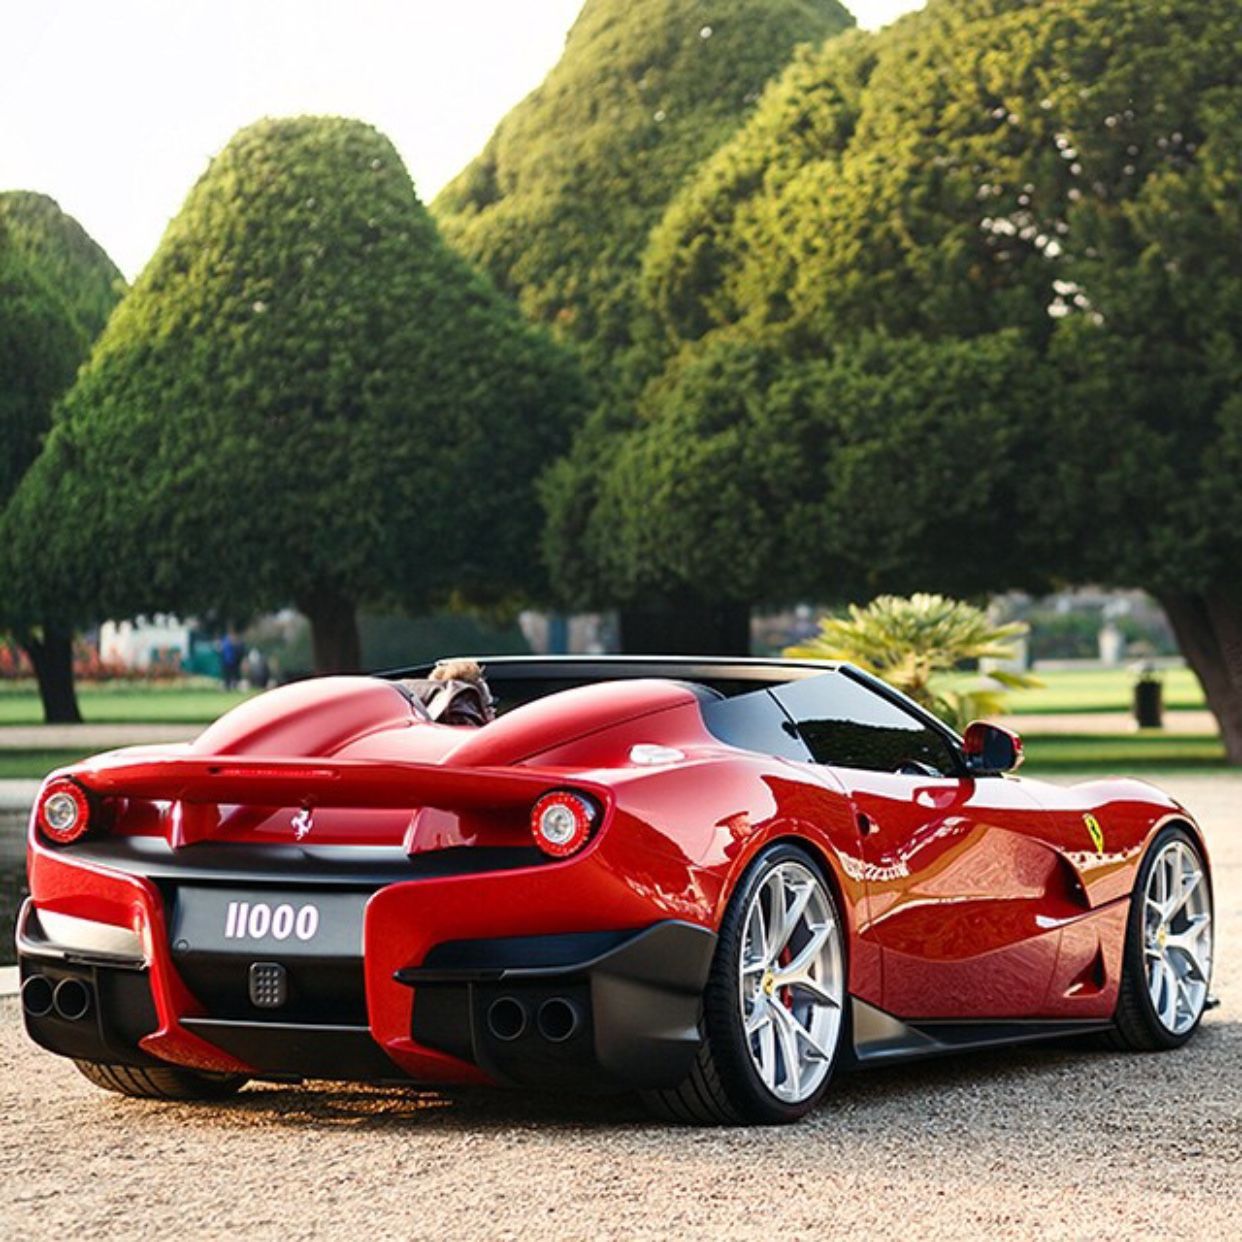 Ferrari F12 TRS painted in Rosso Corsa Photo taken by: @Alexpenfold on Instagram